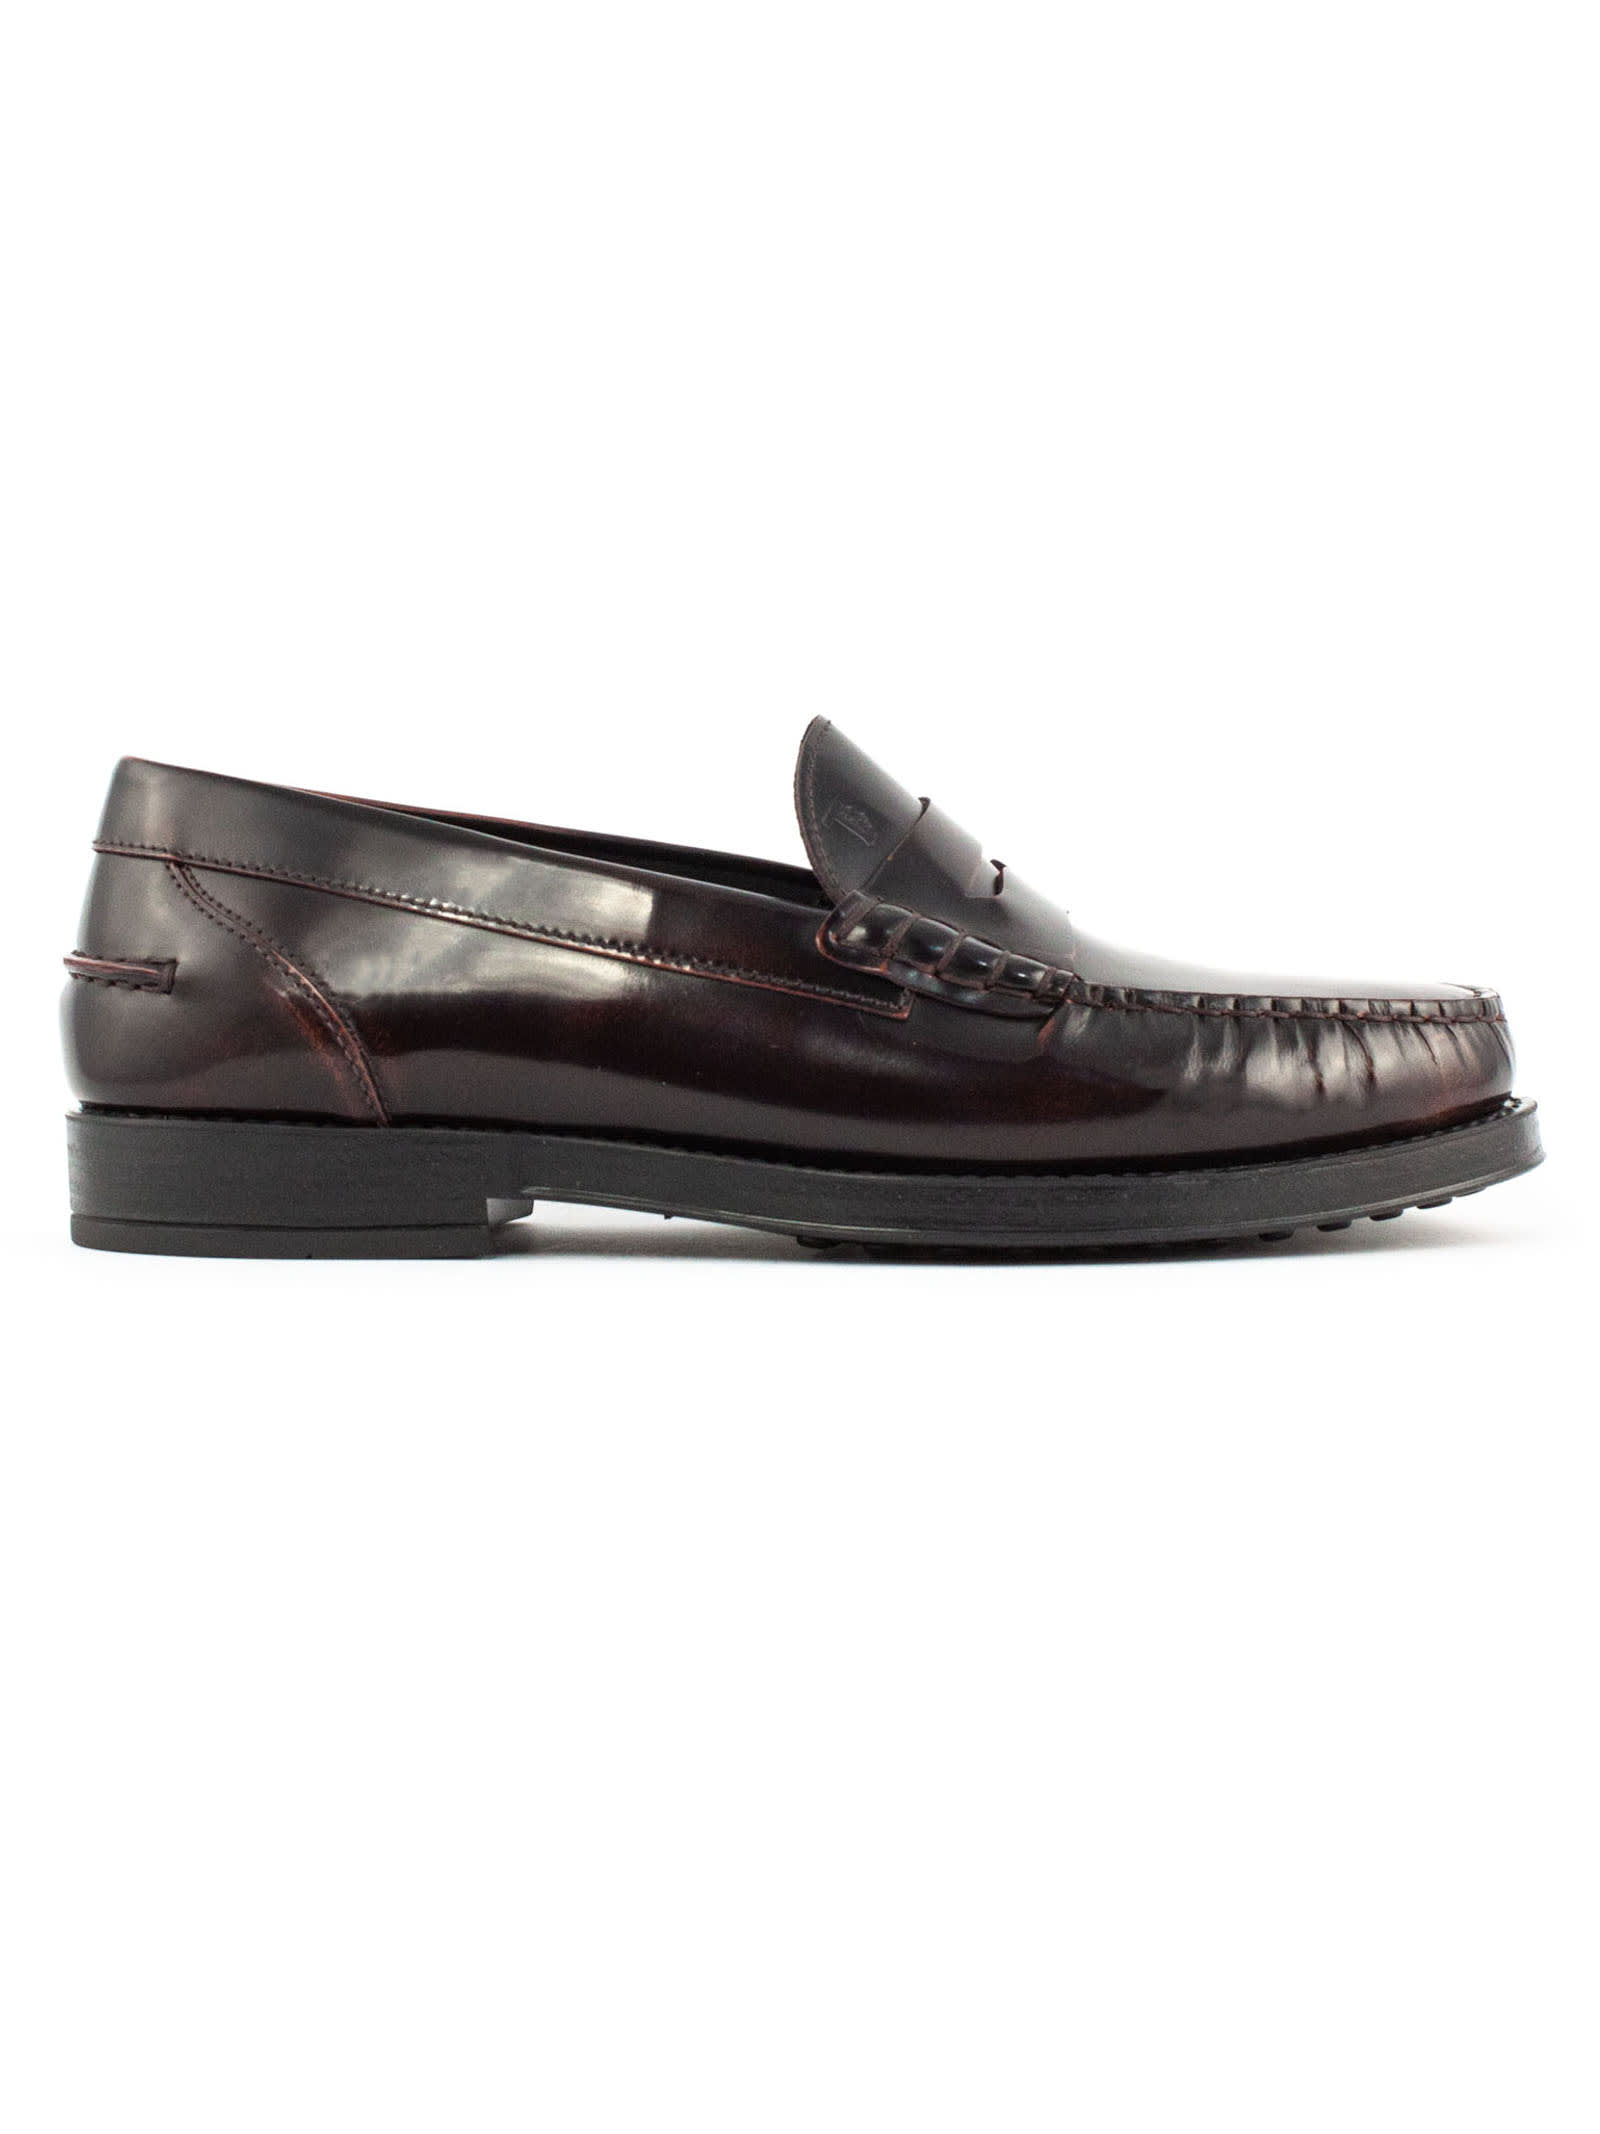 Tods Loafers In Burgundy Brushed Leather